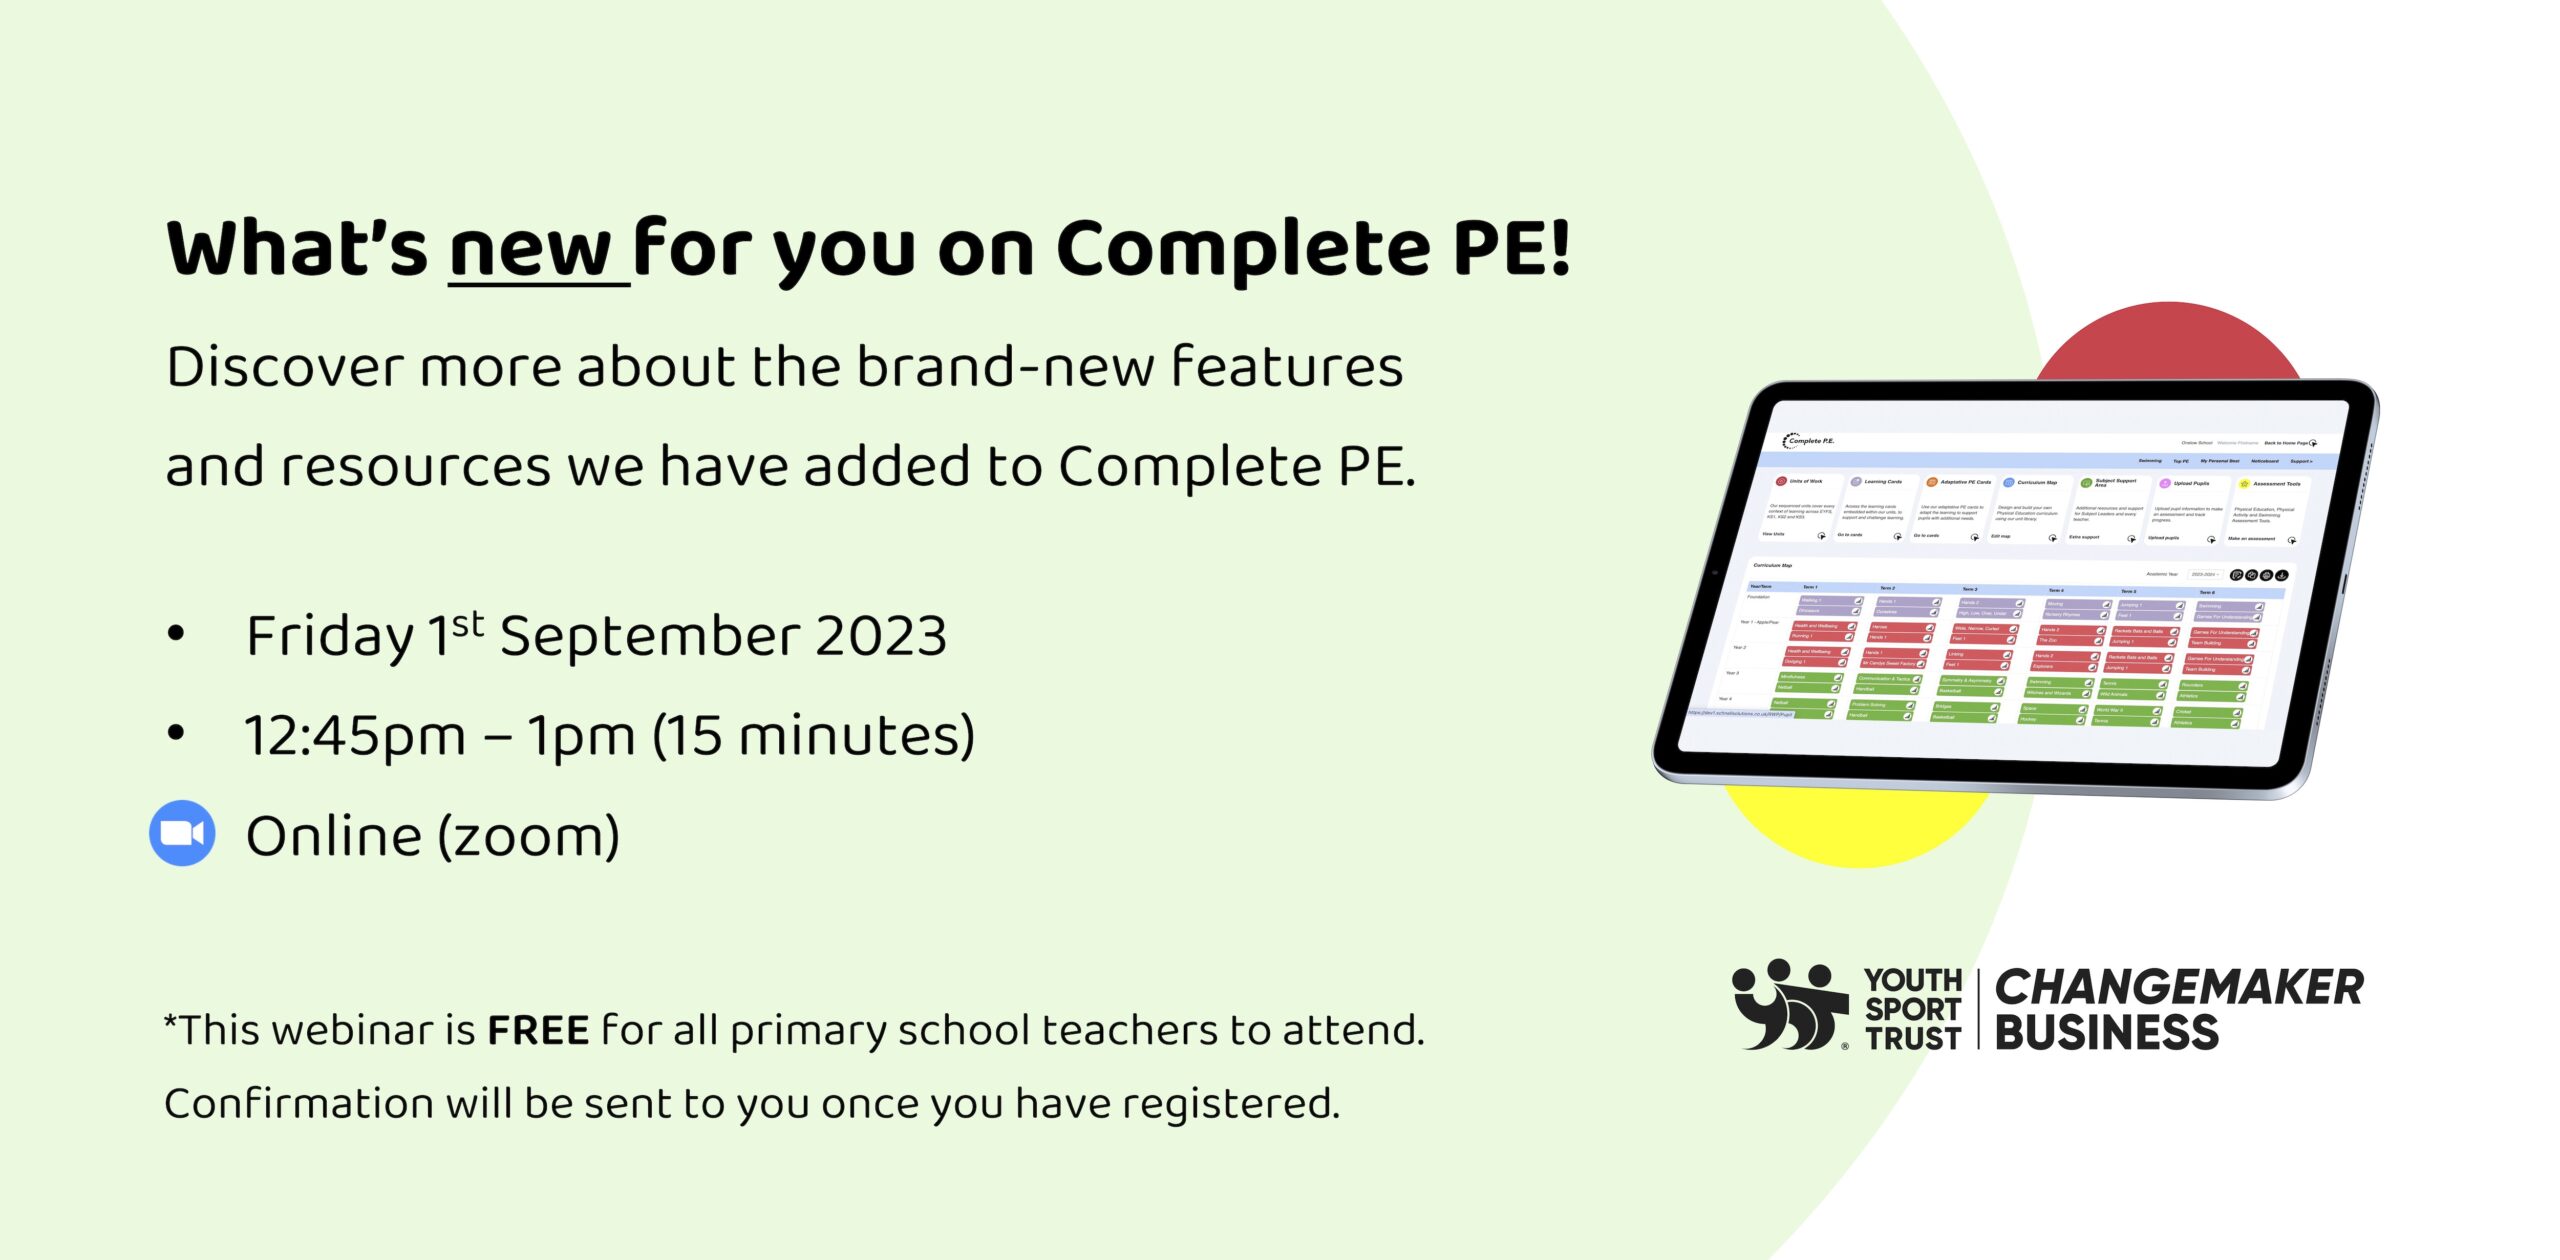 What’s new for you on Complete PE!